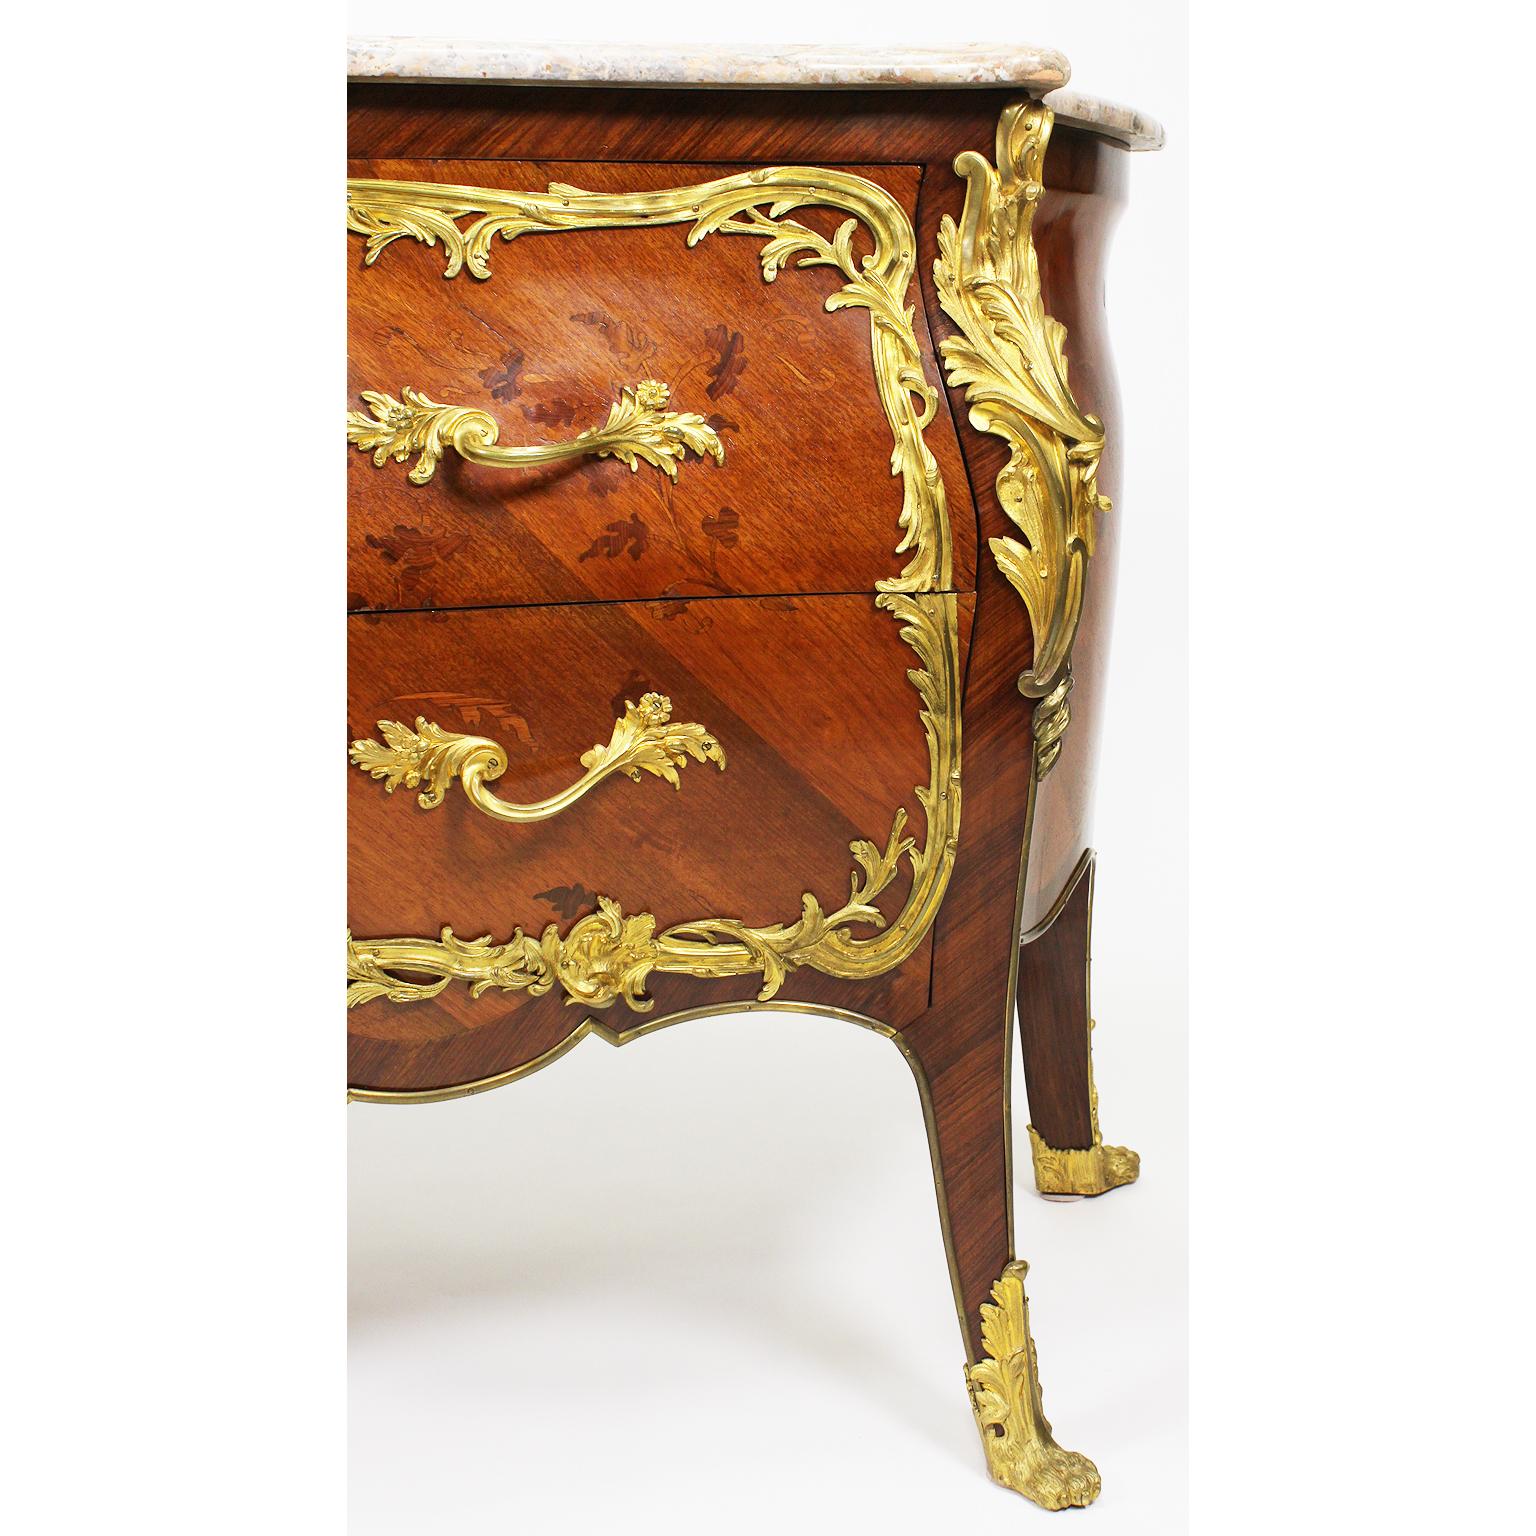 Early 20th Century French 19th-20th Century Louis XV Style Gilt-Bronze Mounted Marquetry Commode For Sale